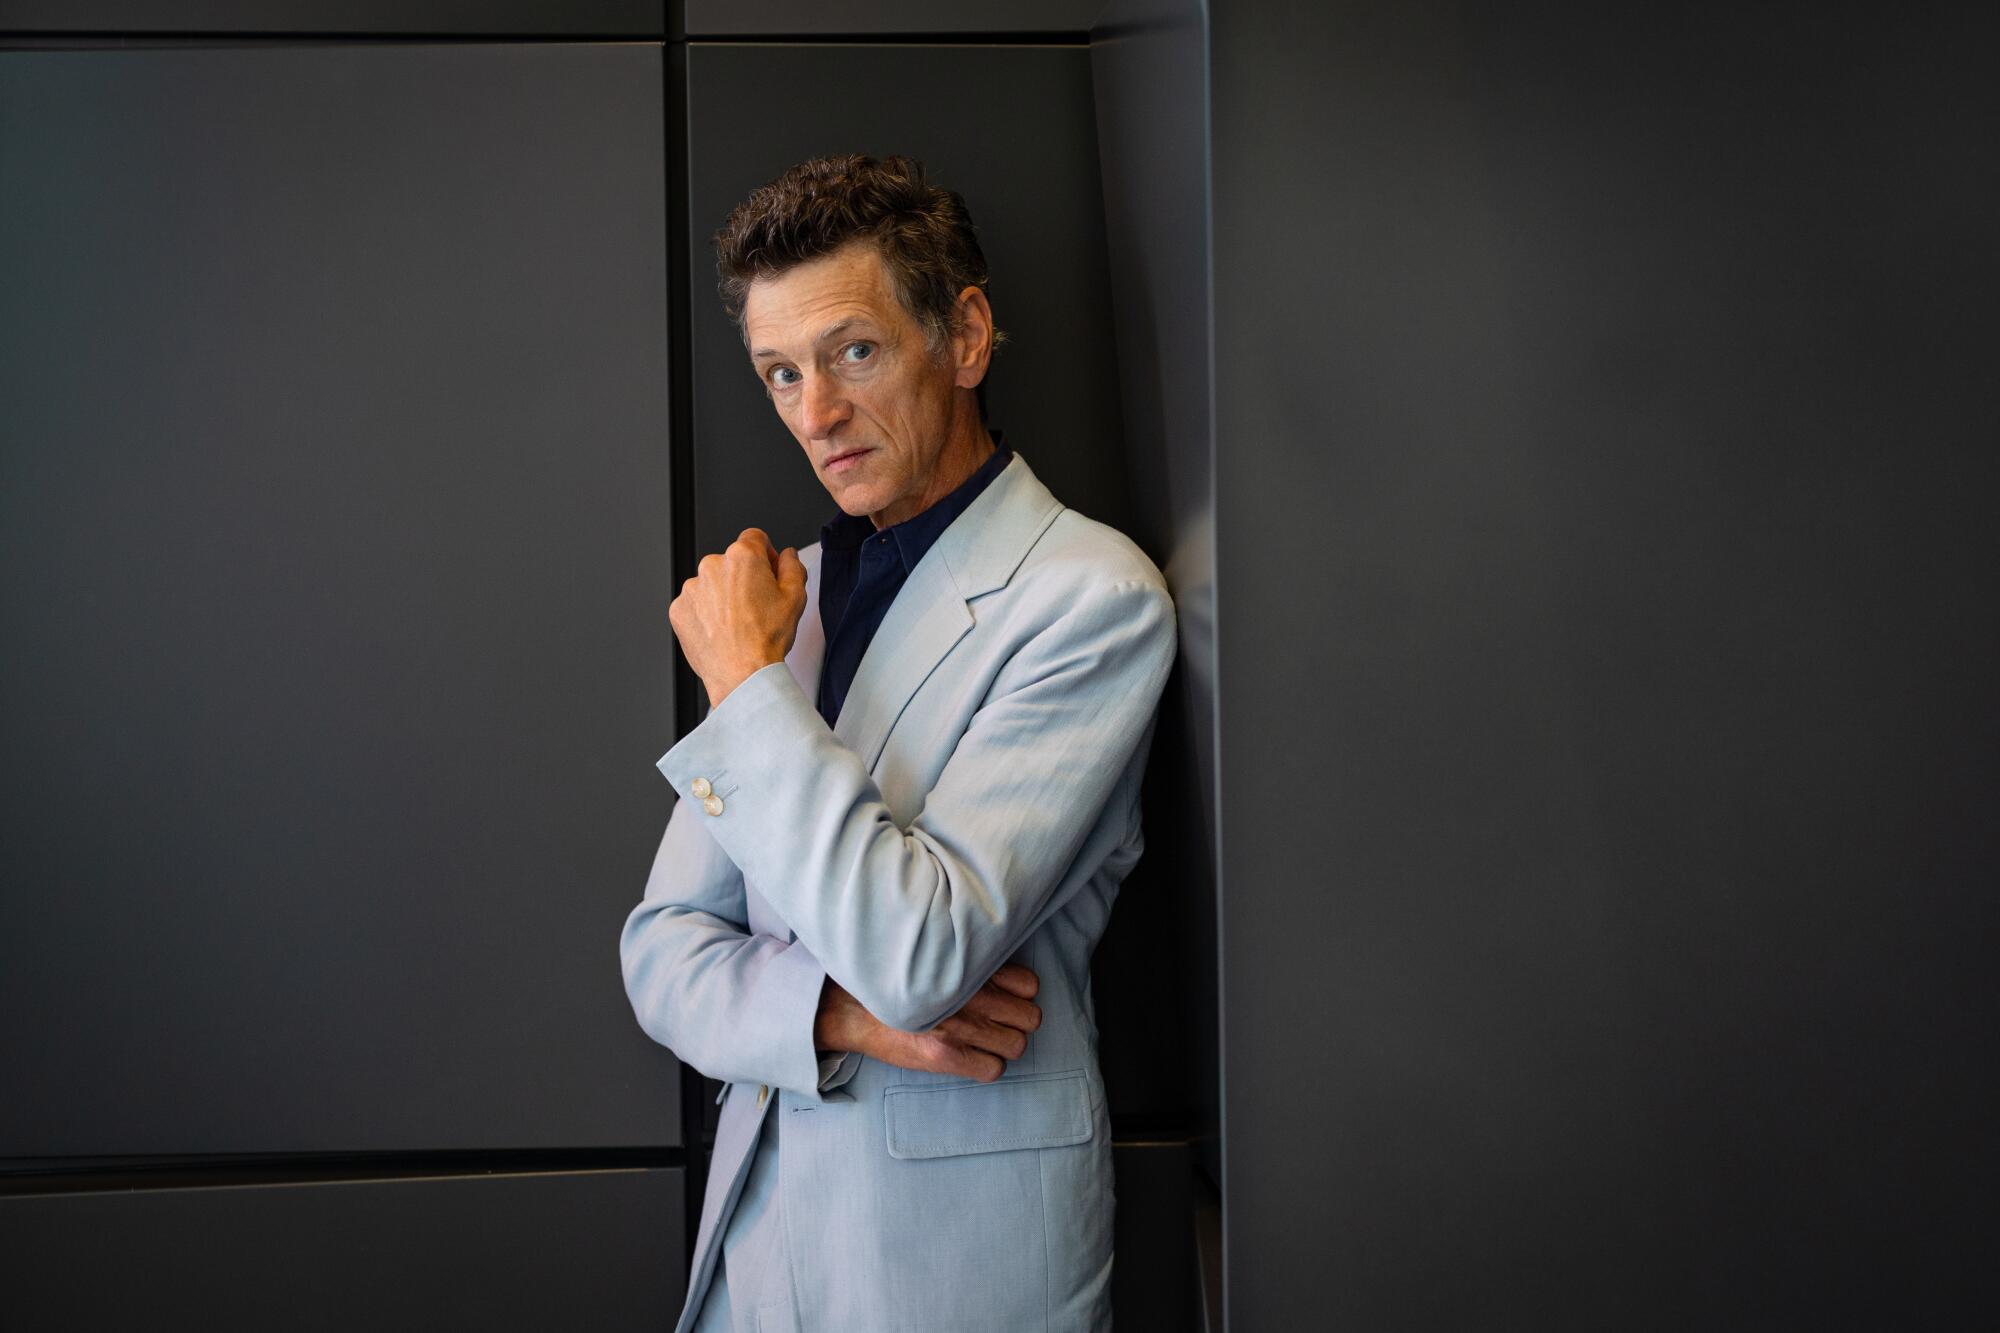 John Hawkes wears a light-colored jacket against a dark wall for a portrait.